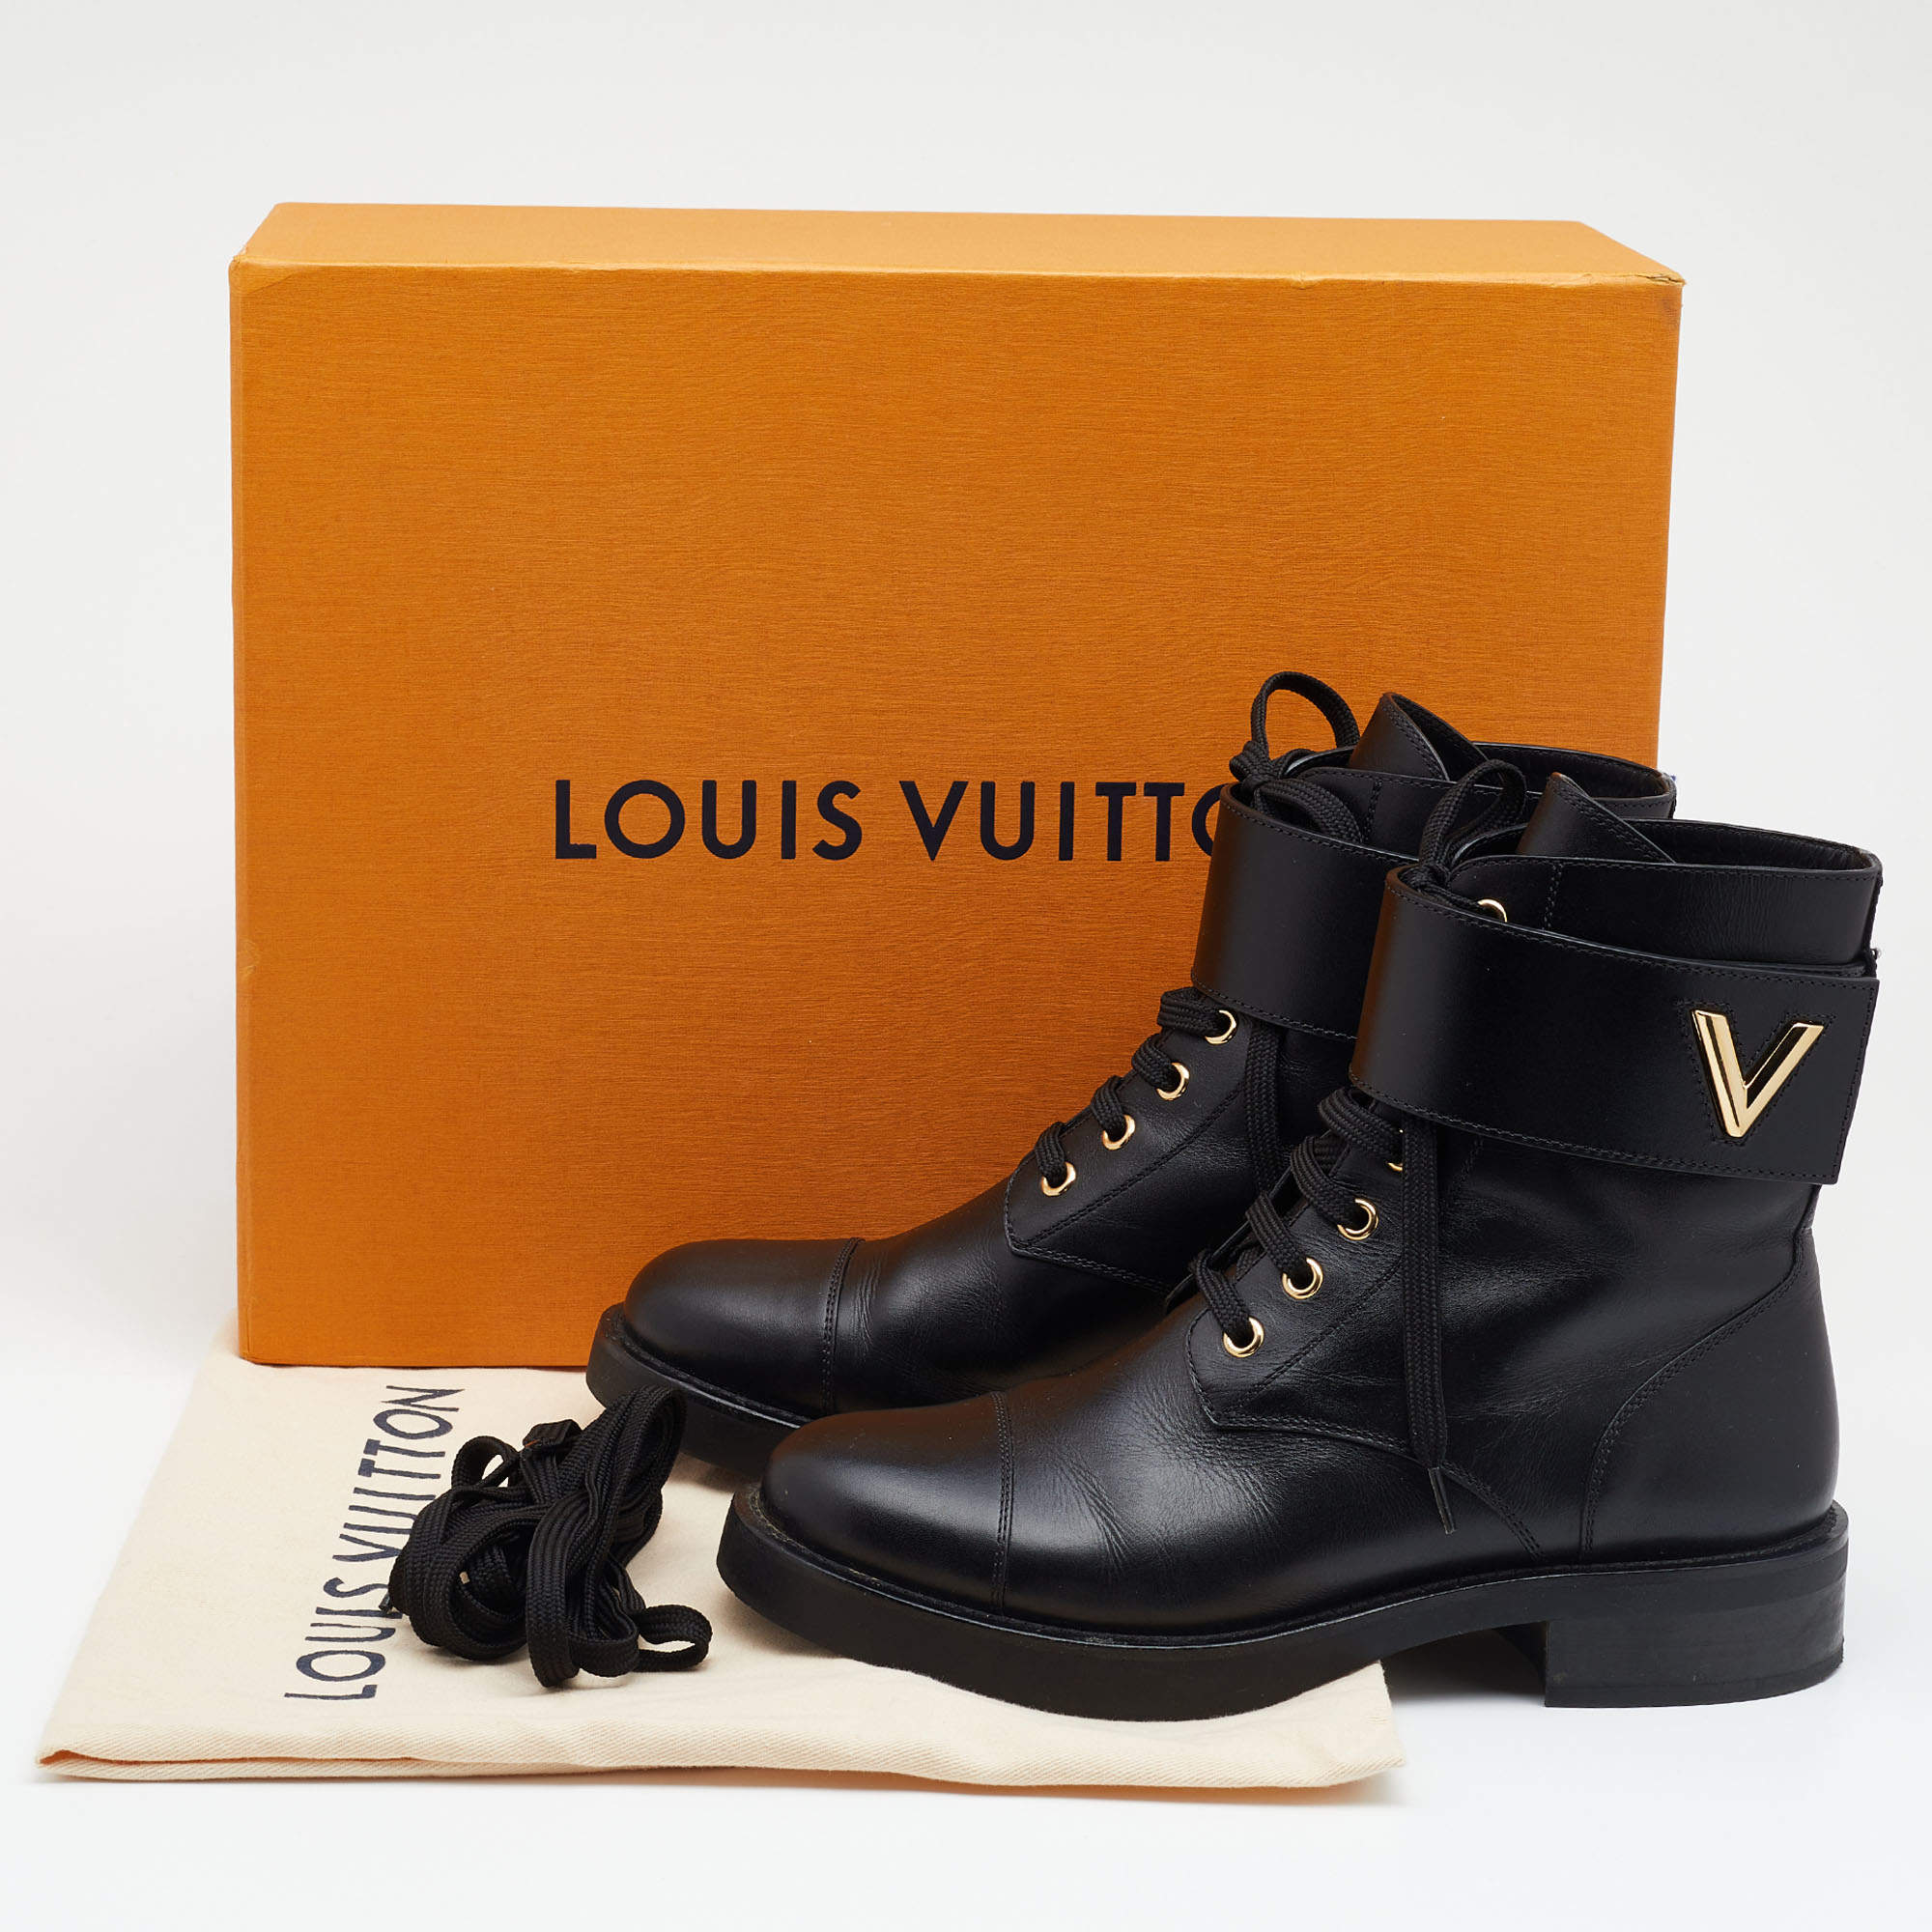 LOUIS VUITTON, Wonderland ranger, ankle boots, black calf leather,  embossed classic LV pattern, the sides with decoration of LV Twist  accessory in yellow metal (same buckle as on the bags). Vintage Clothing